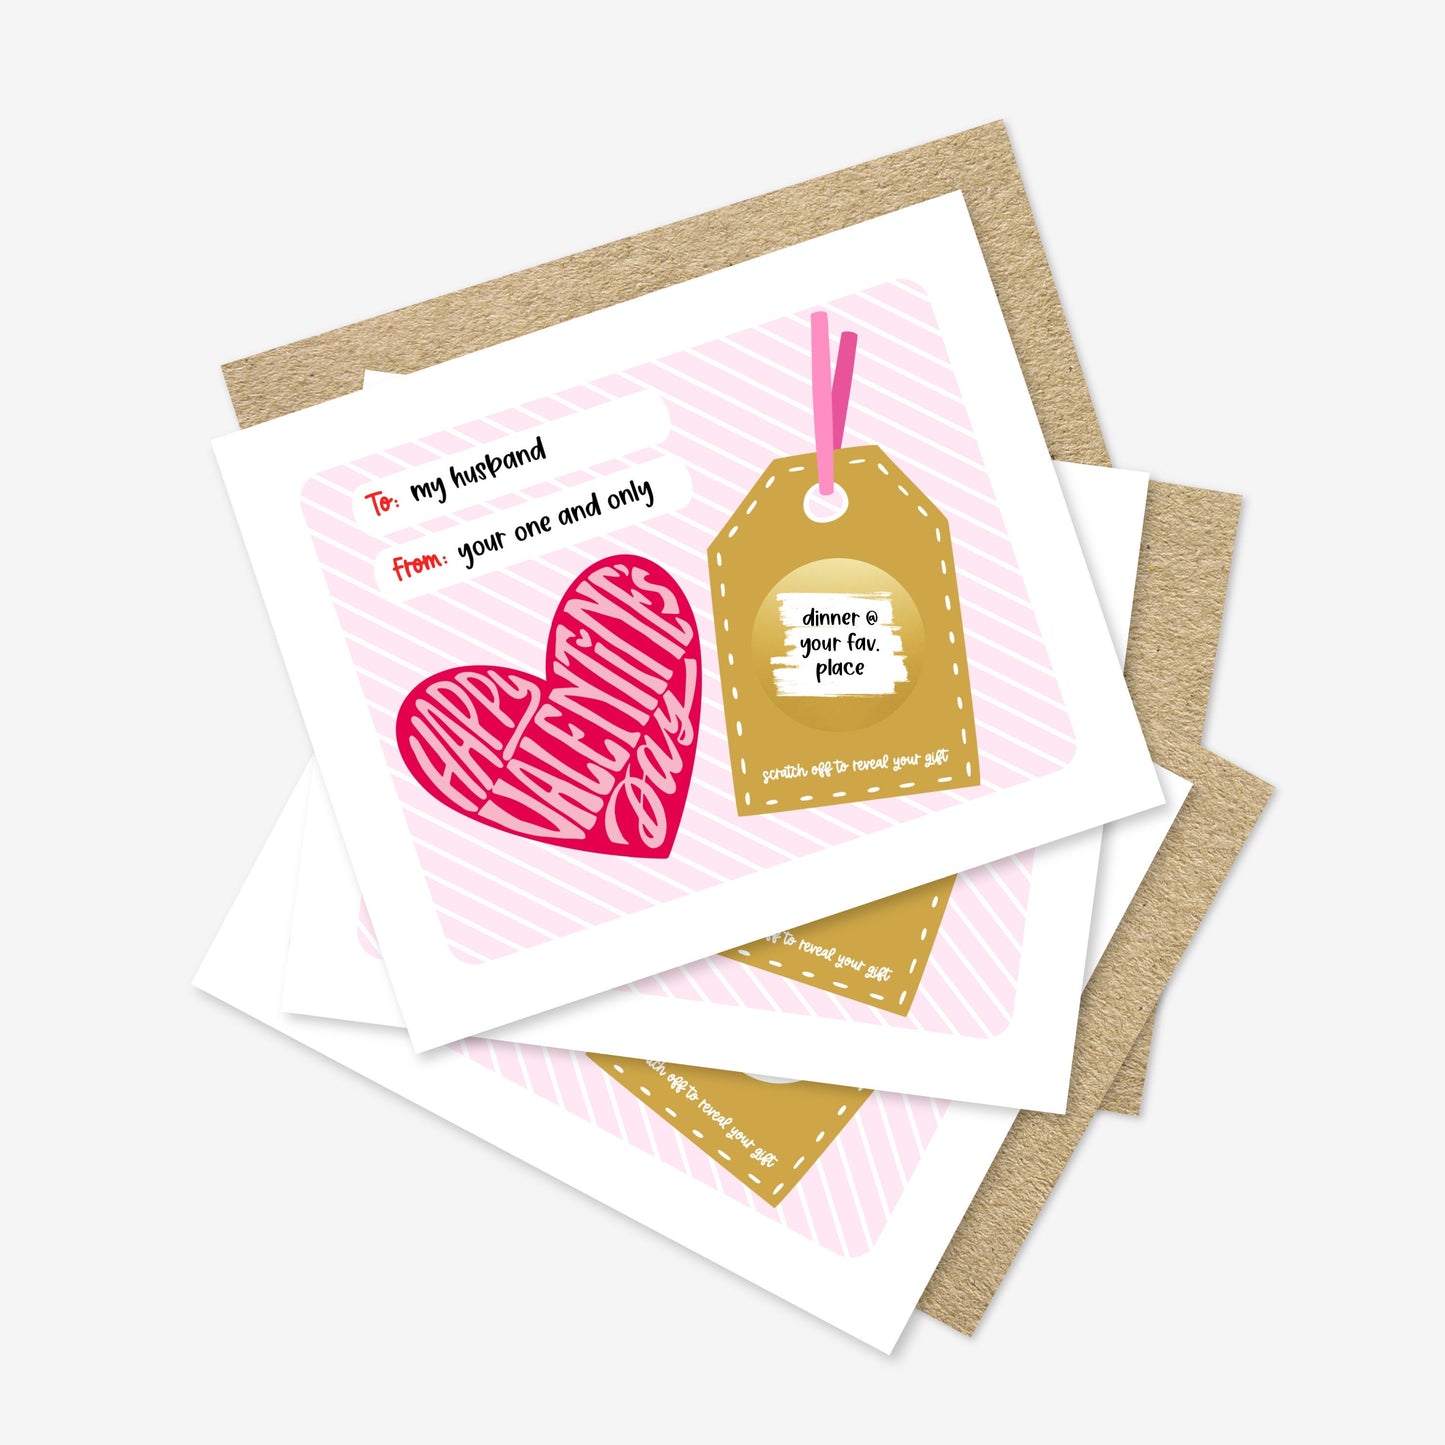 3 PK DIY Custom Text Scratch Off Happy Valentines Day Gift Voucher Flat Note Card | Personalized Gift Surprise Card